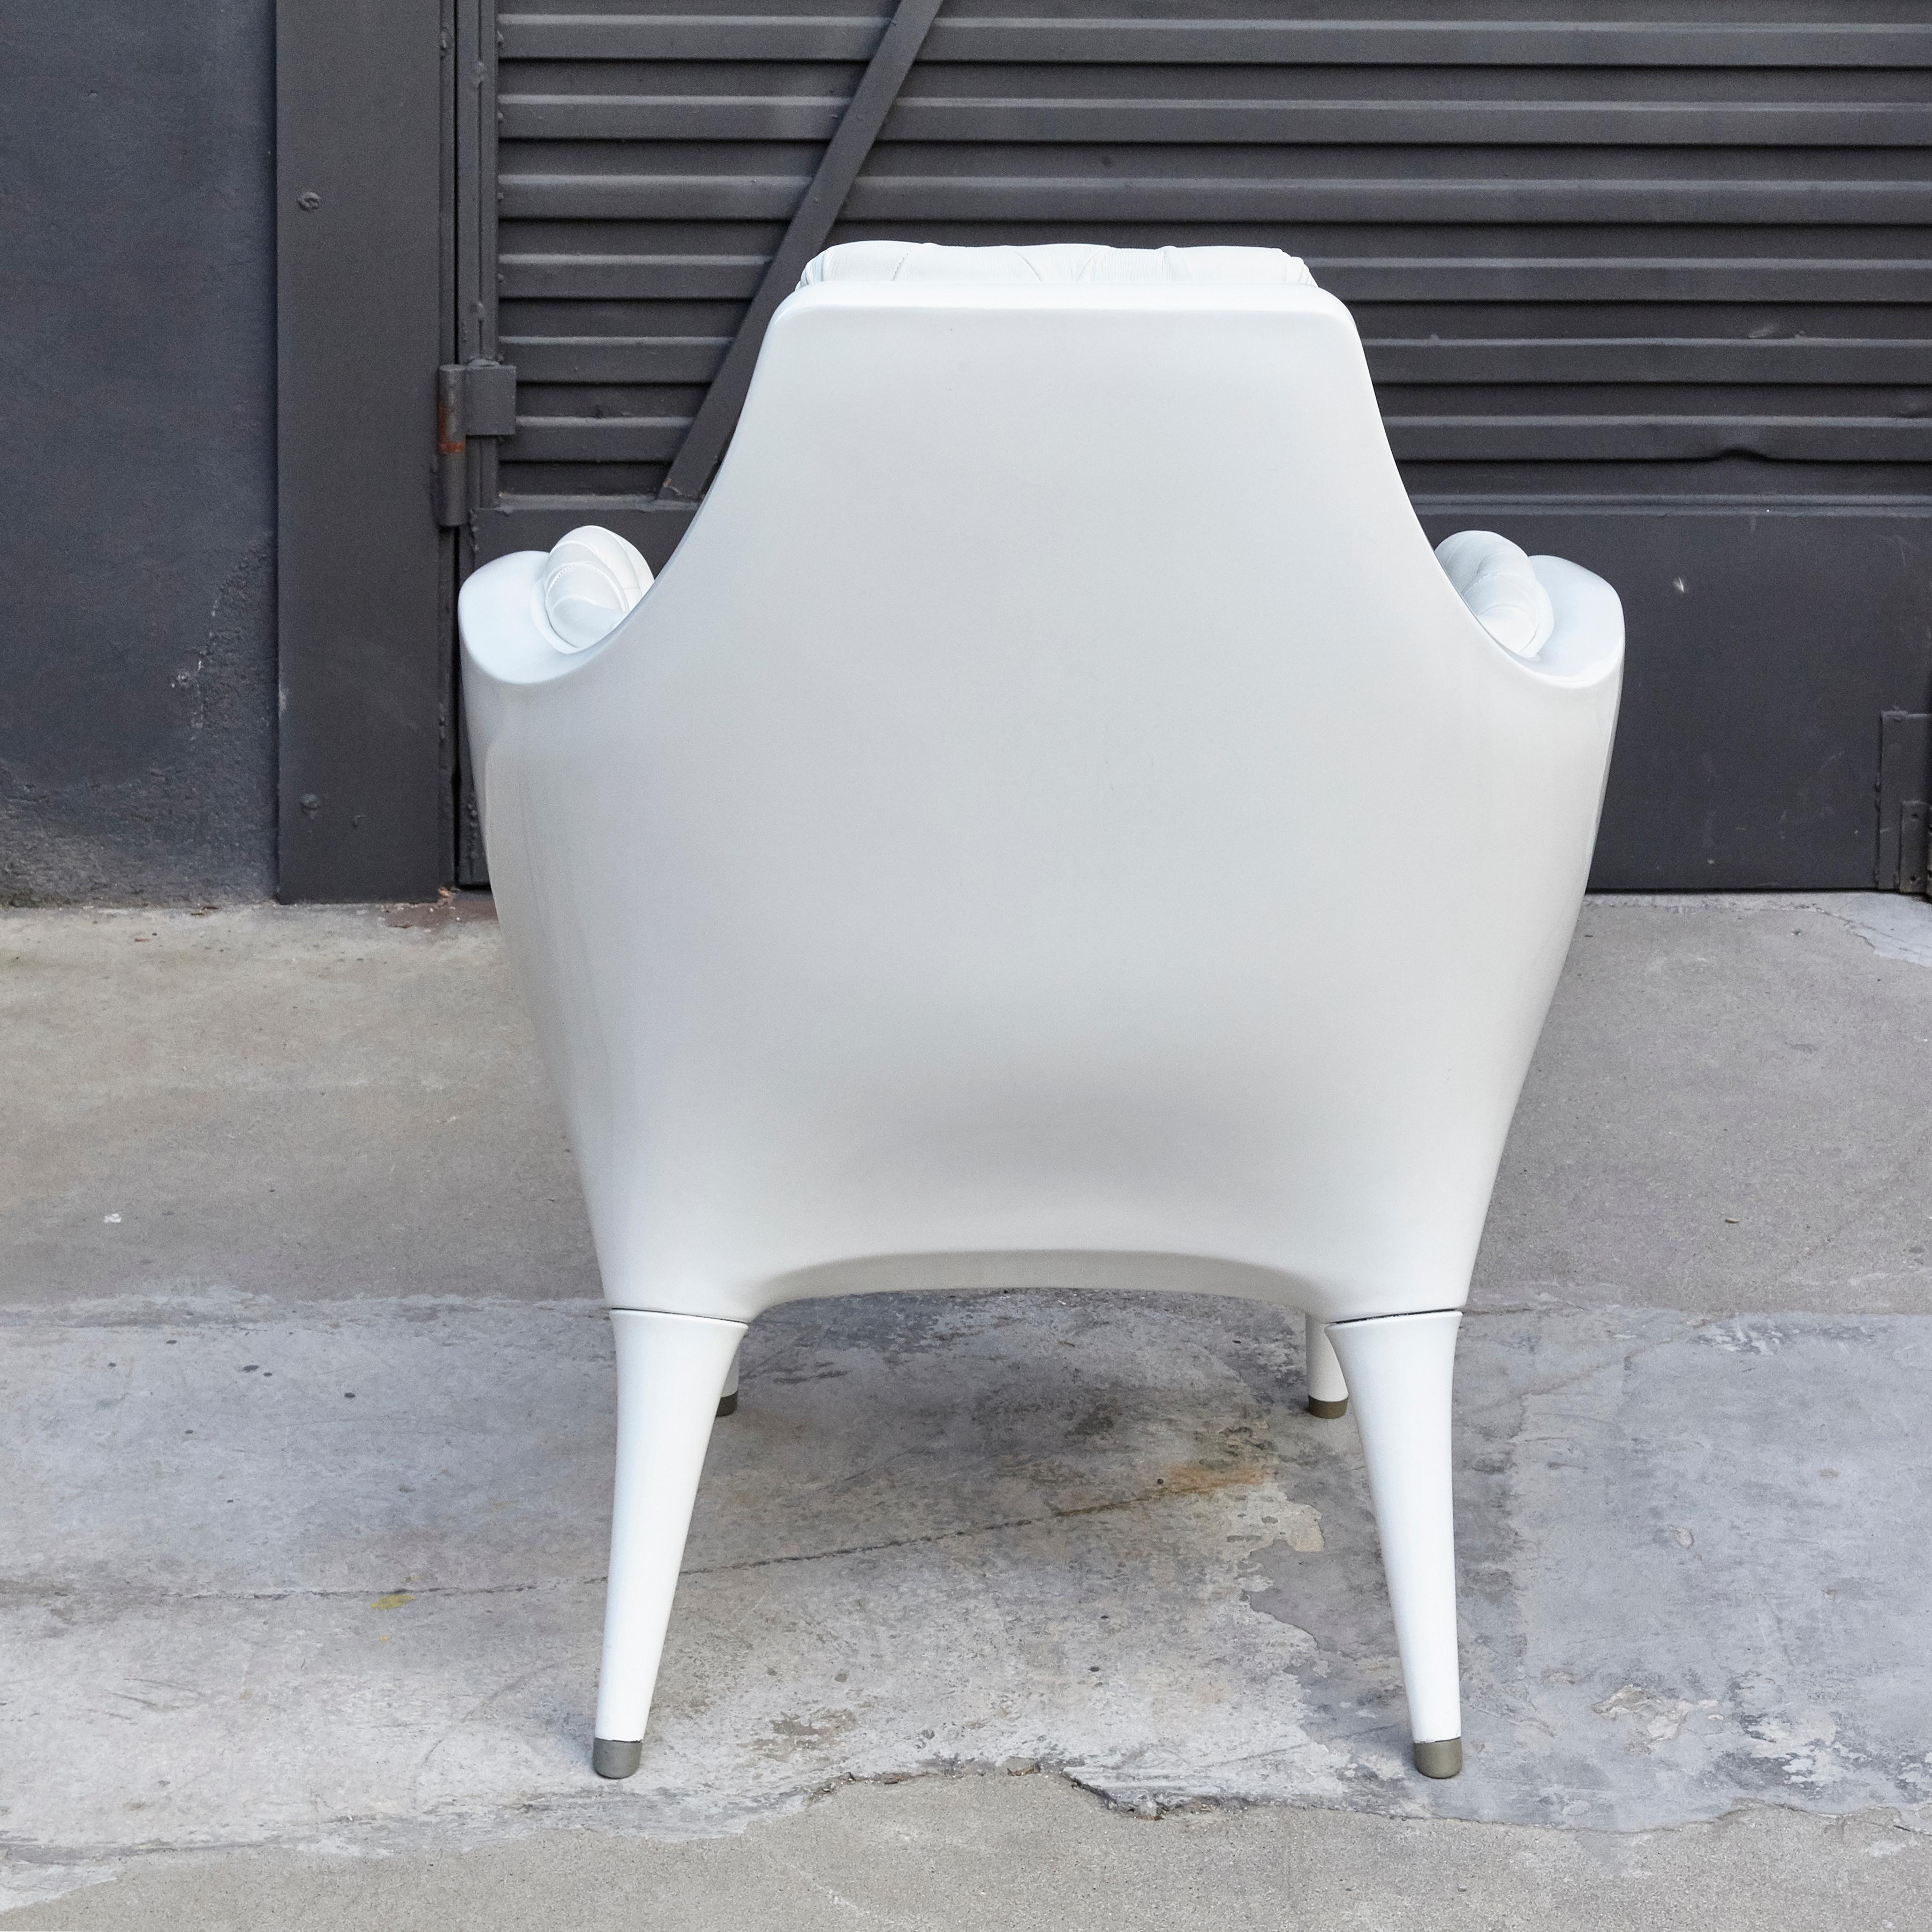 Upholstery White Jaime Hayon Contemporary Showtime Armchair Lacquered For Sale